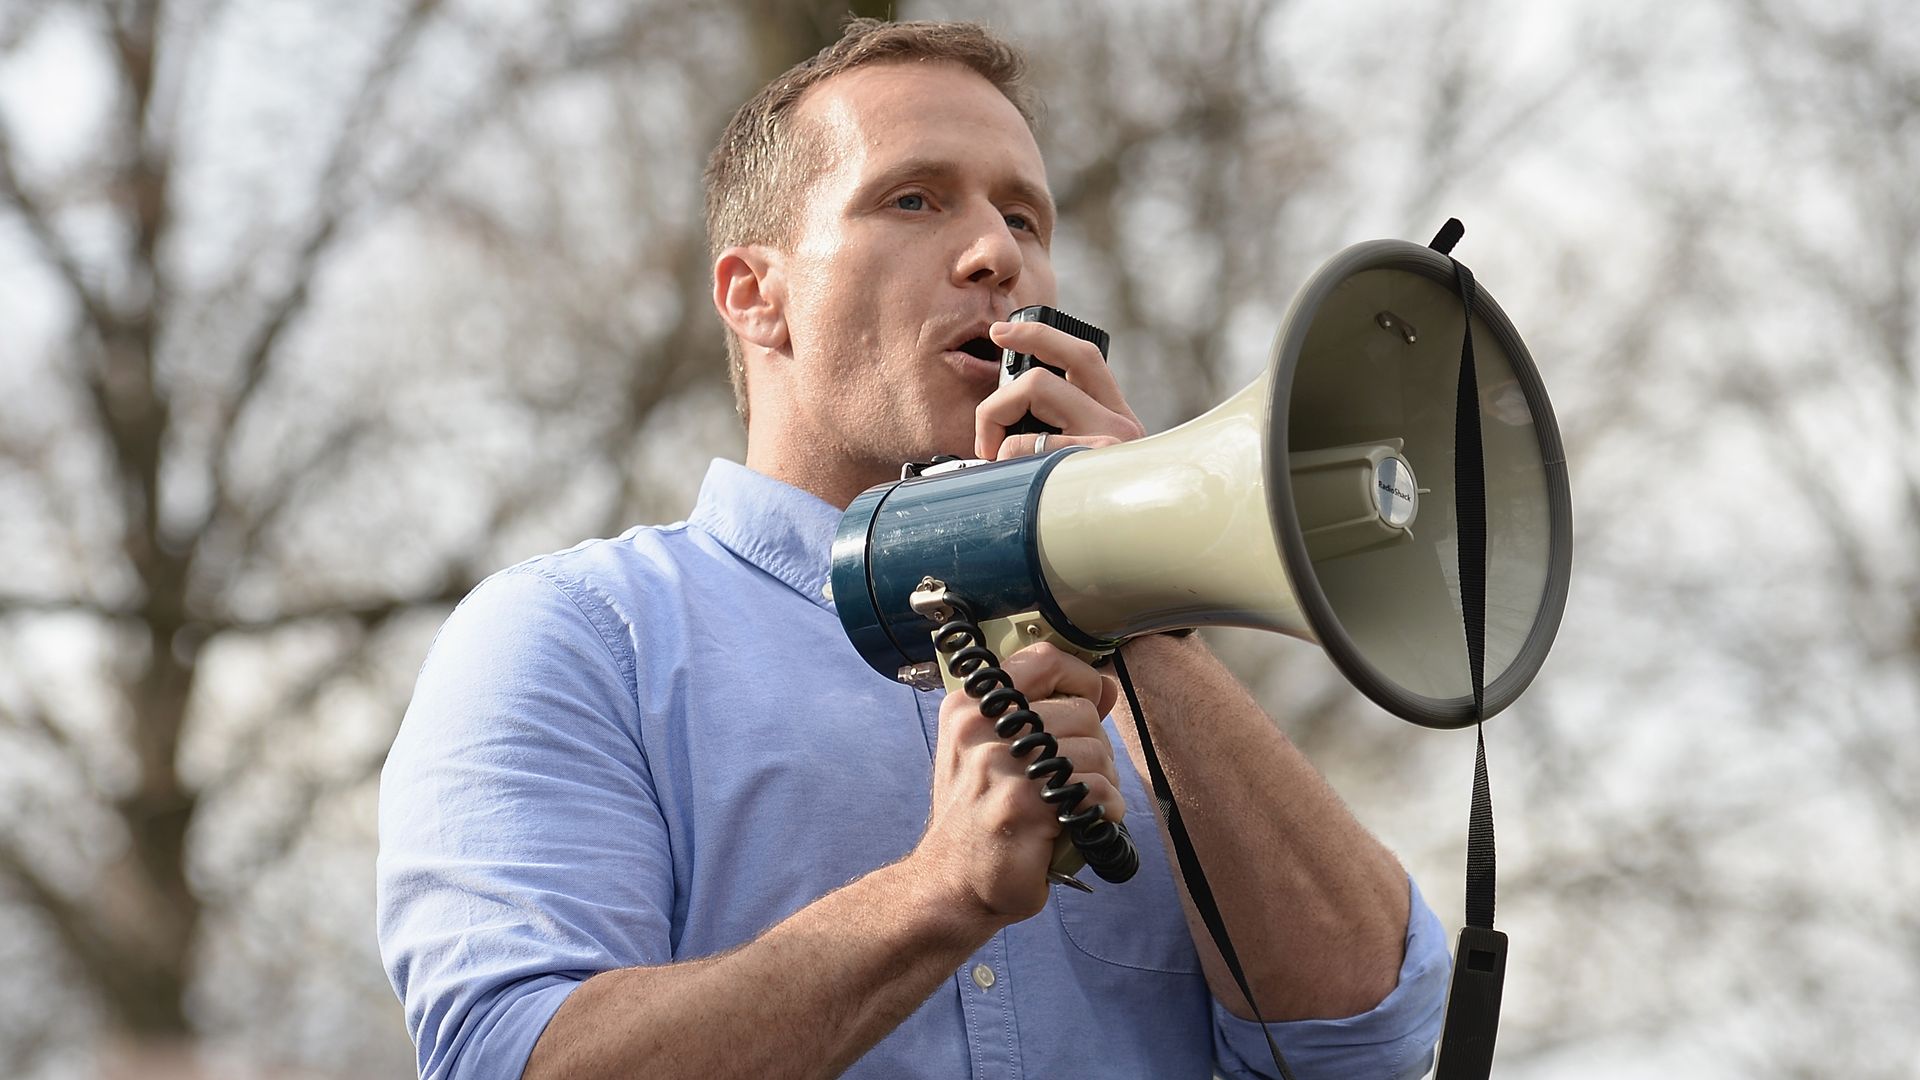 Eric Greitens speaks into a megaphone while standing outside